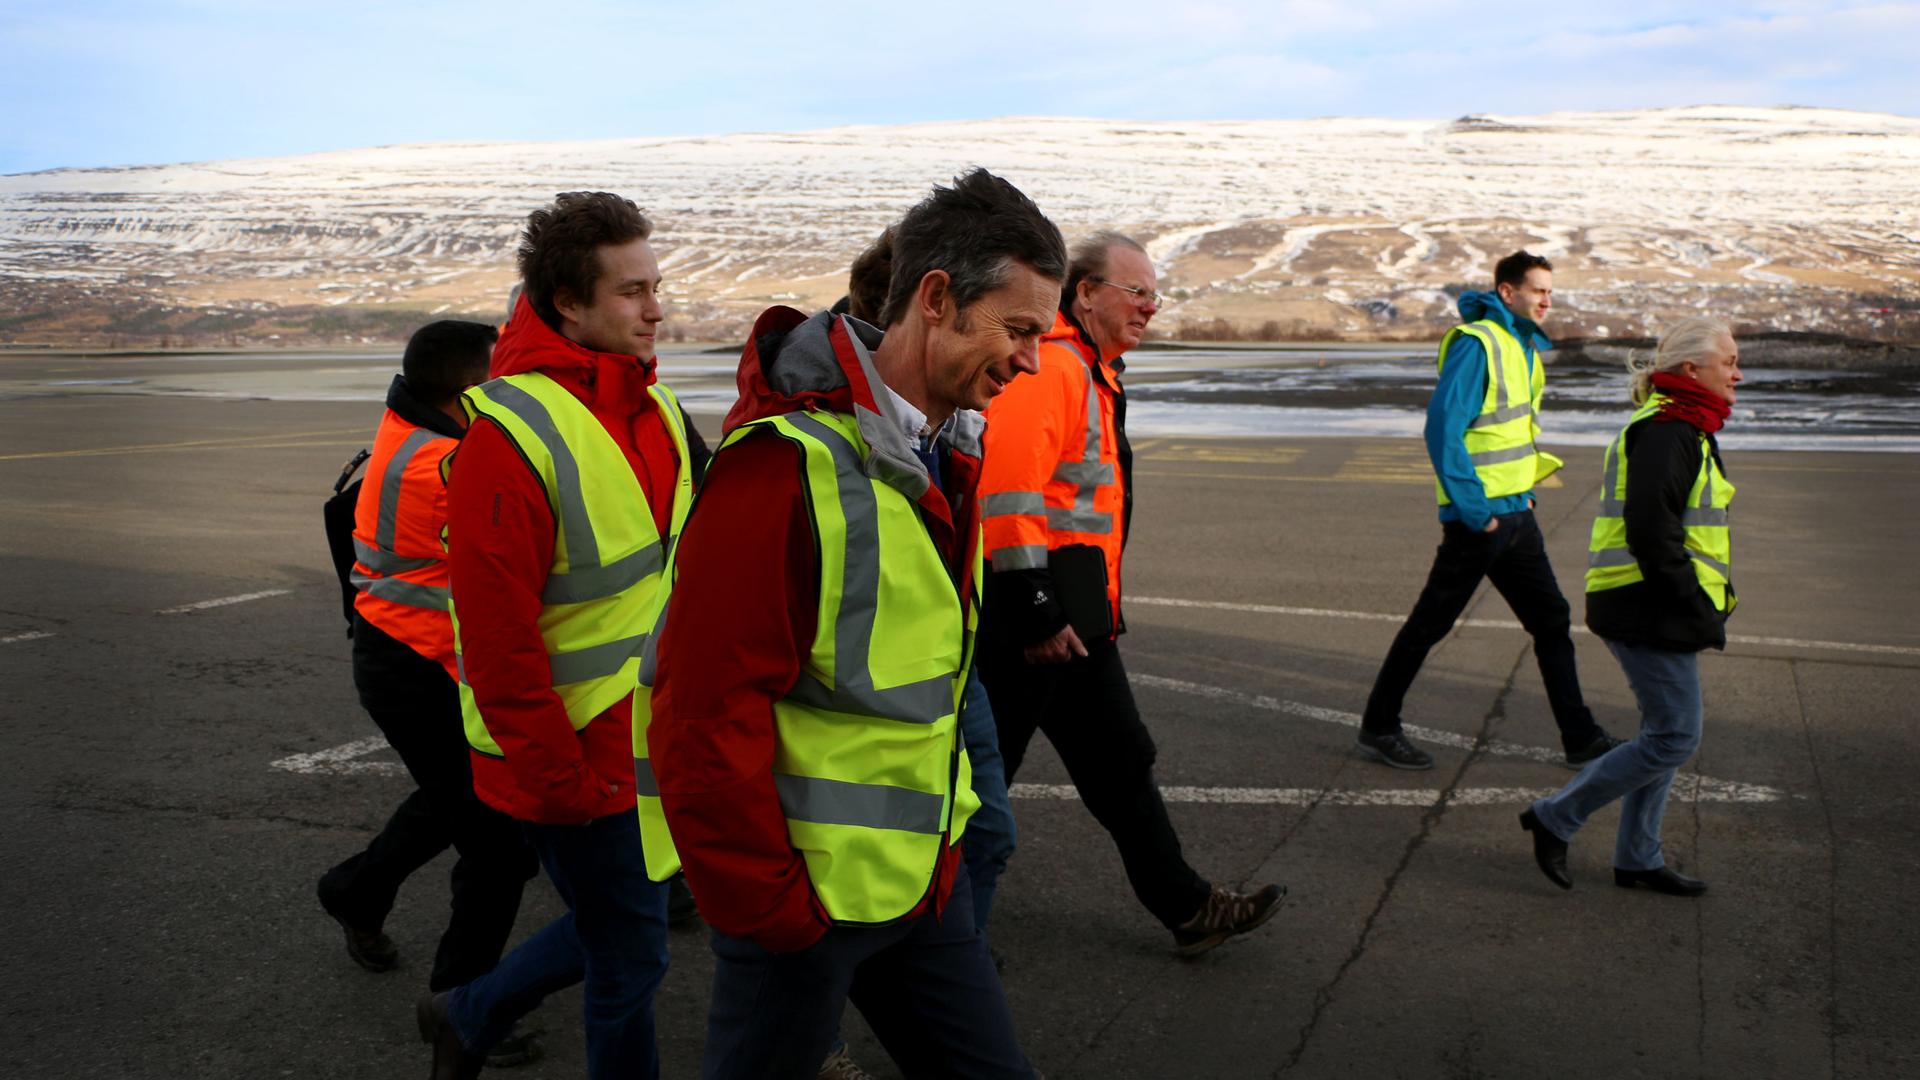 A group of people in bright safety vests walk through the wind on a tarmac.